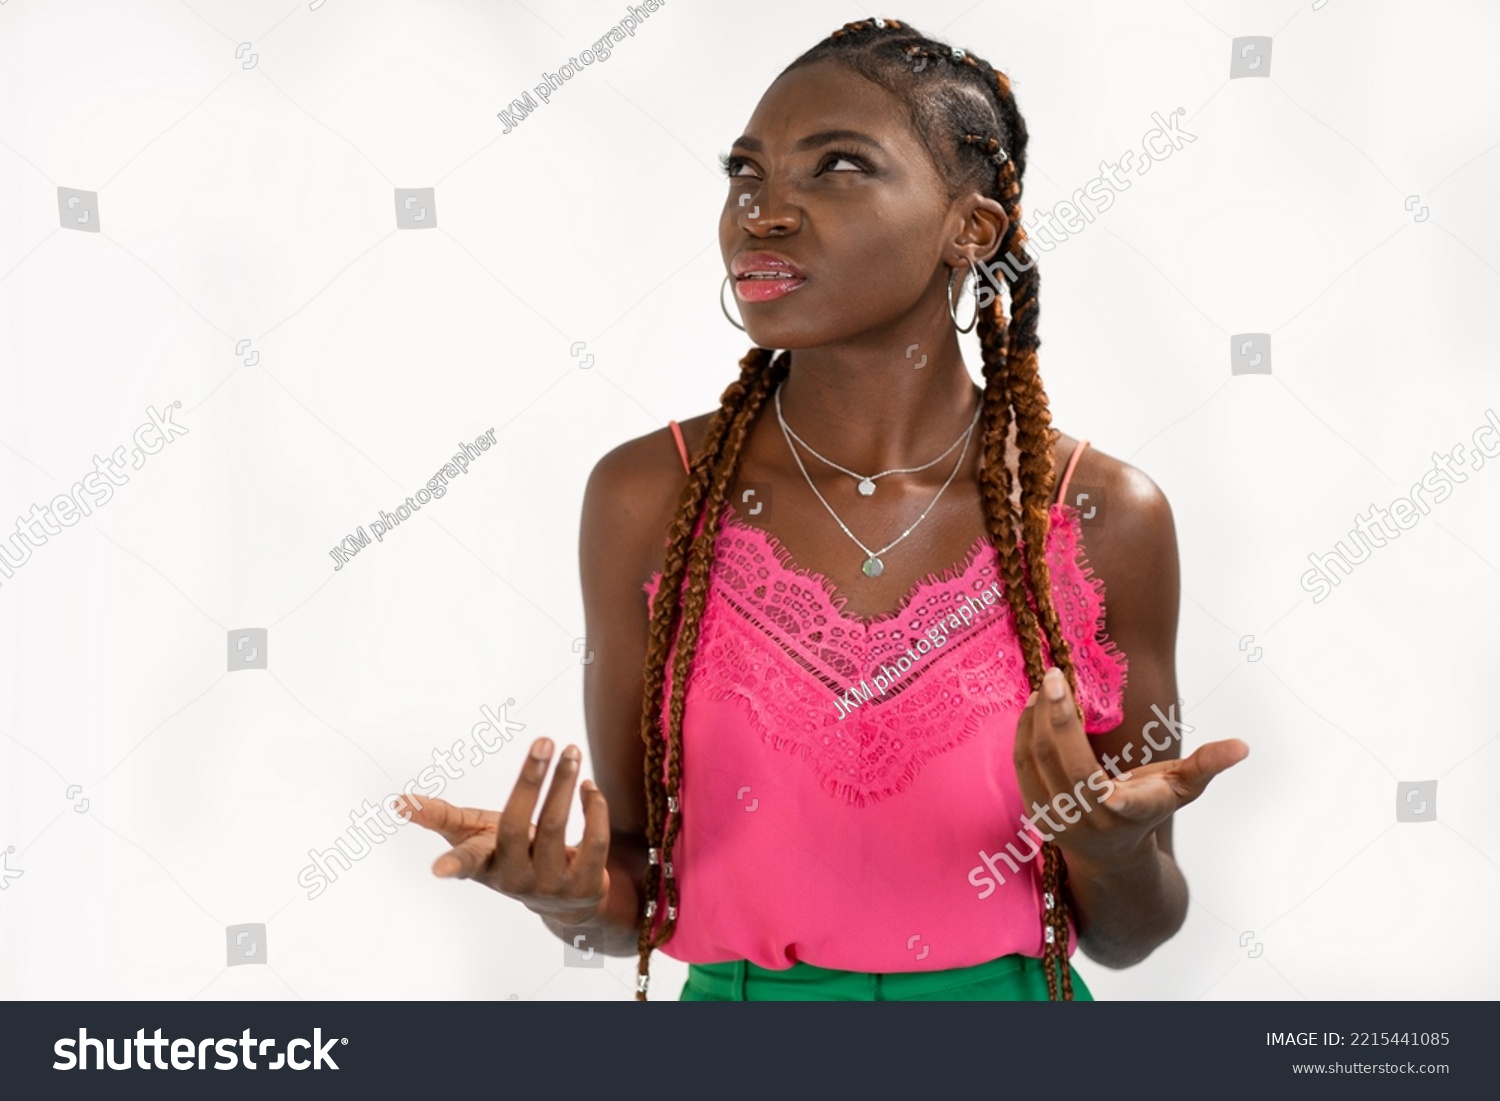 The woman who feels confused cannot understand what her friend is referring to. Portrait of dark skinned woman clueless and questioned unaware #2215441085